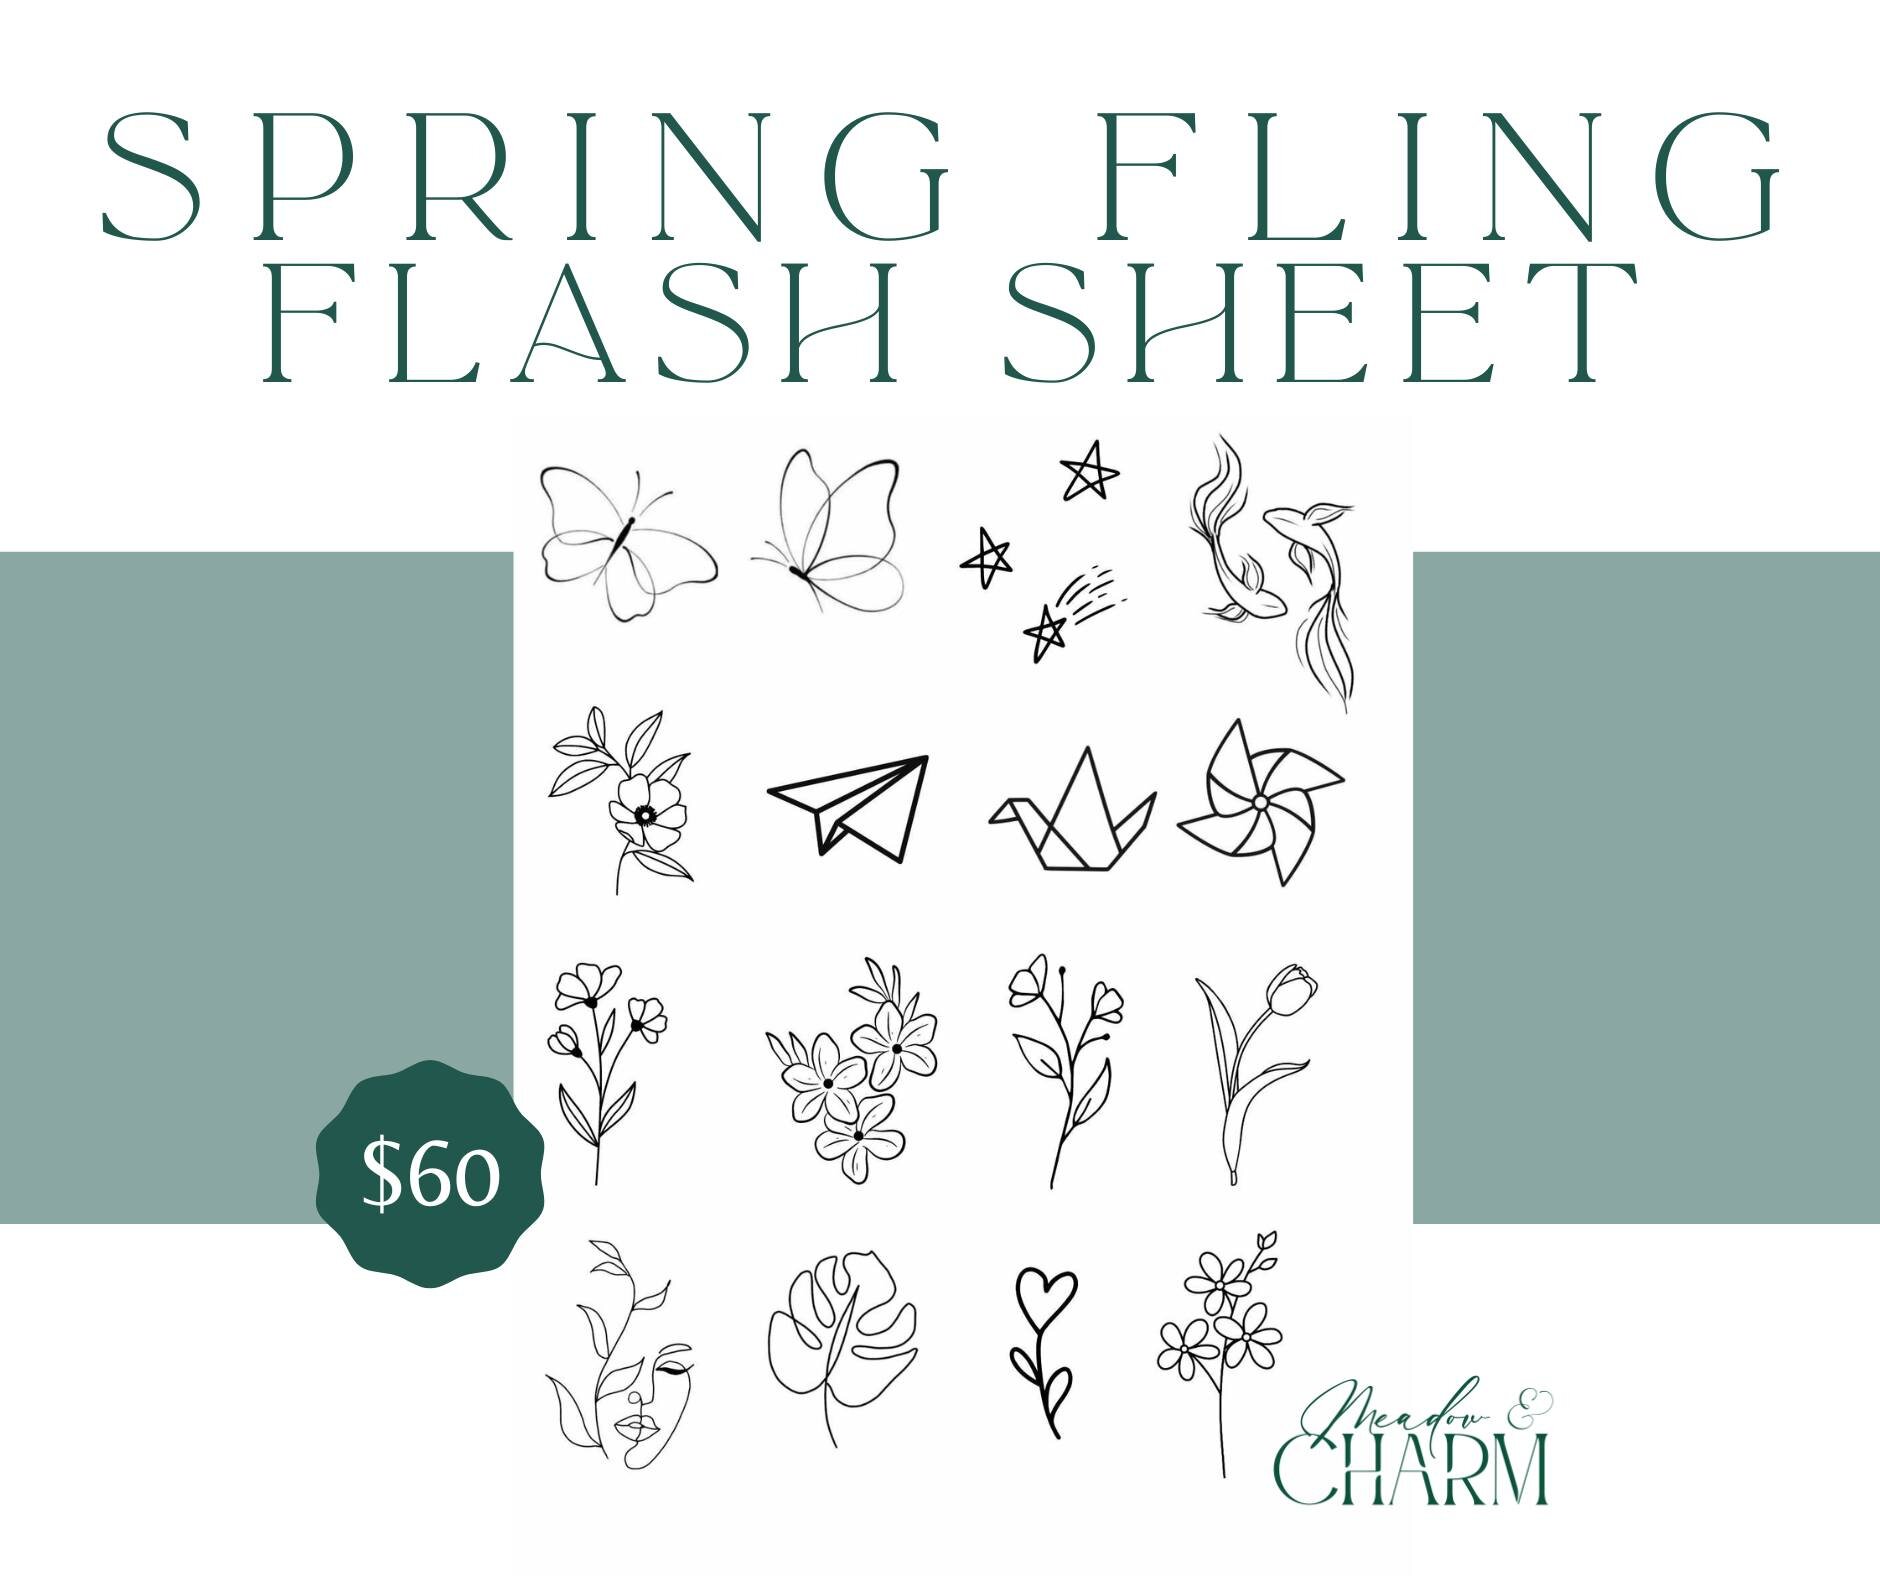 Spring Fling Flash Tattoos! This Friday from 4-8 in Avoca, flash tattoos will be first come, first serve! Tattoos are all 1.5-2 inches and no modifications are available during this event. Come early to sign up then spend your time shopping downtown 